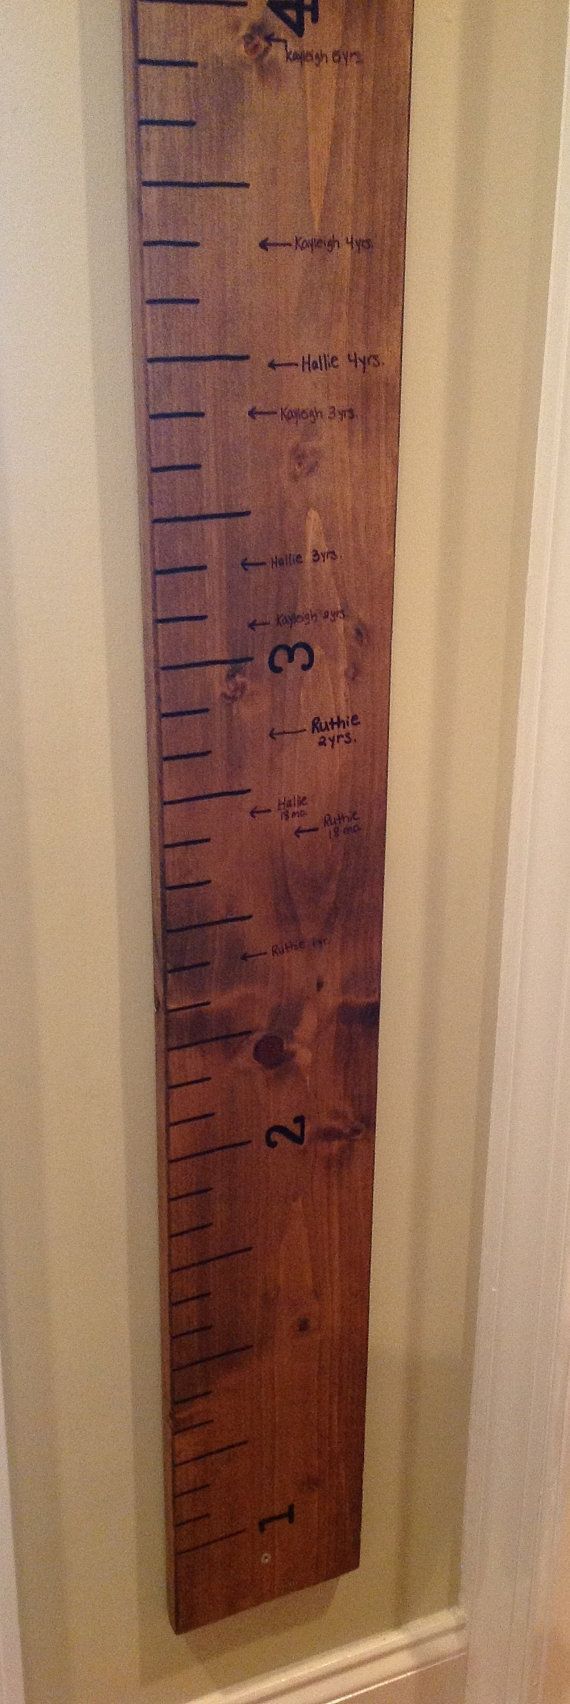 Giant Ruler. Family Growth Chart. Childrens Growth Chart. Childrens Measuring Chart. Rustic Home Decor. Wall Hanging.